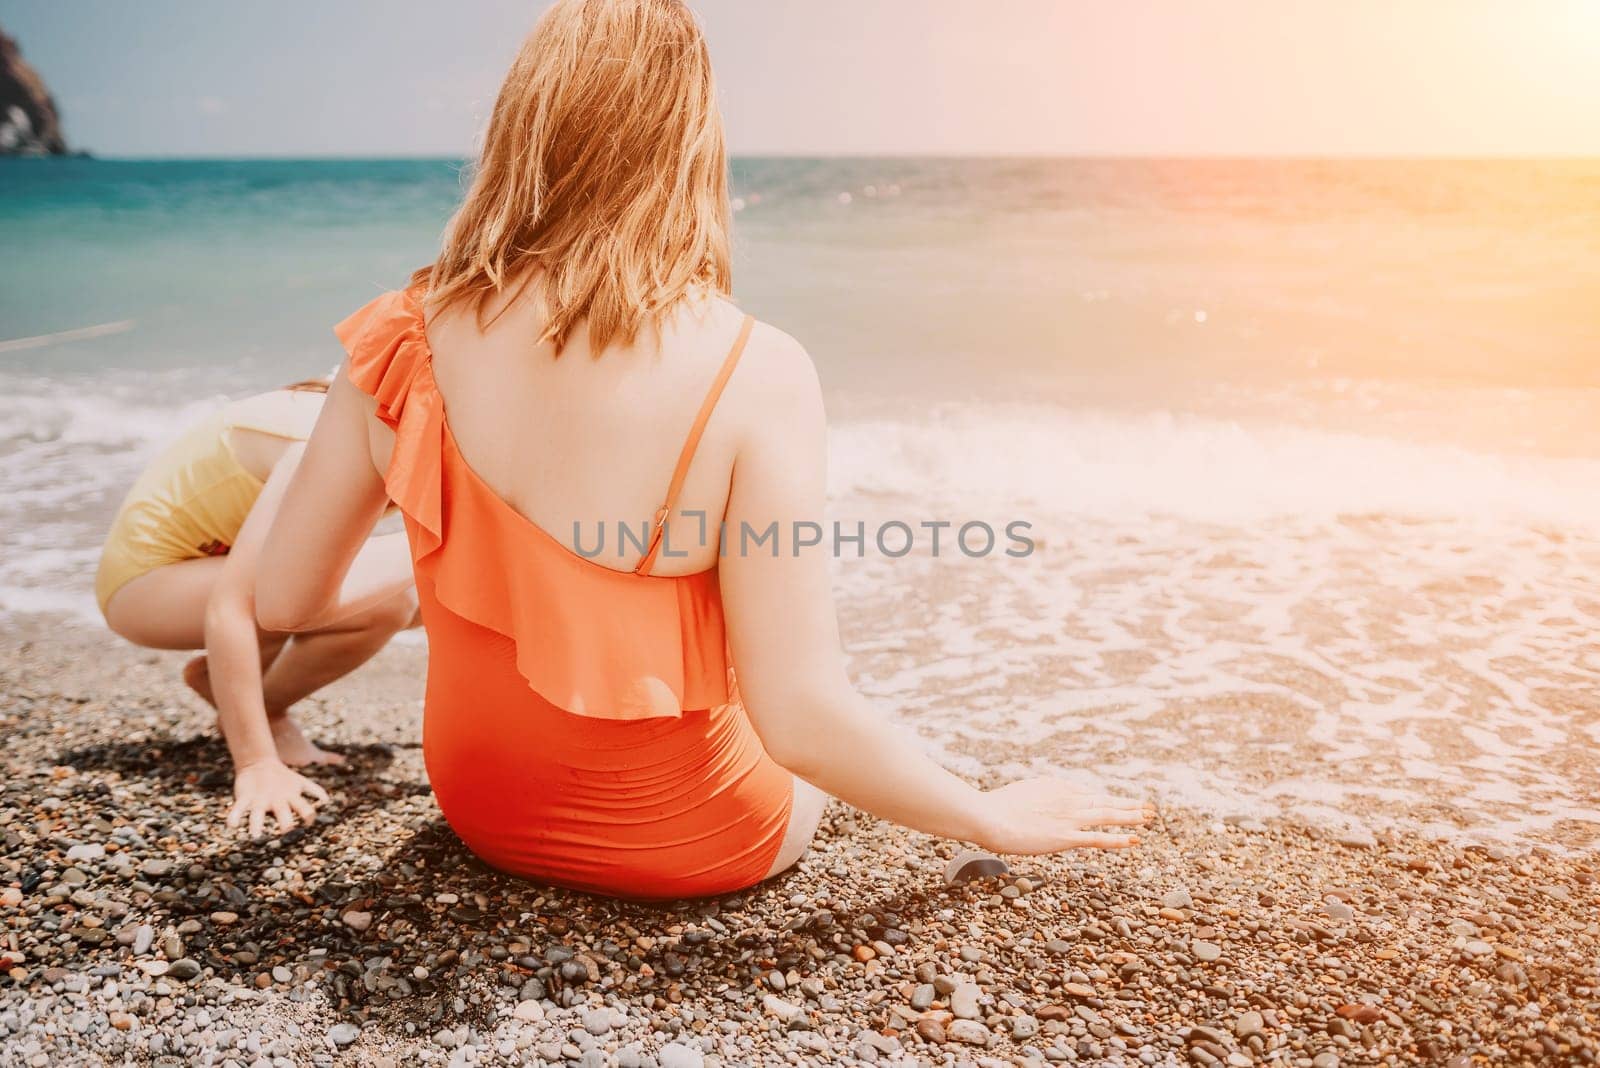 Happy loving family mother and daughter having fun together on the beach. Mum playing with her kid in holiday vacation next to the ocean - Family lifestyle and love concept by panophotograph